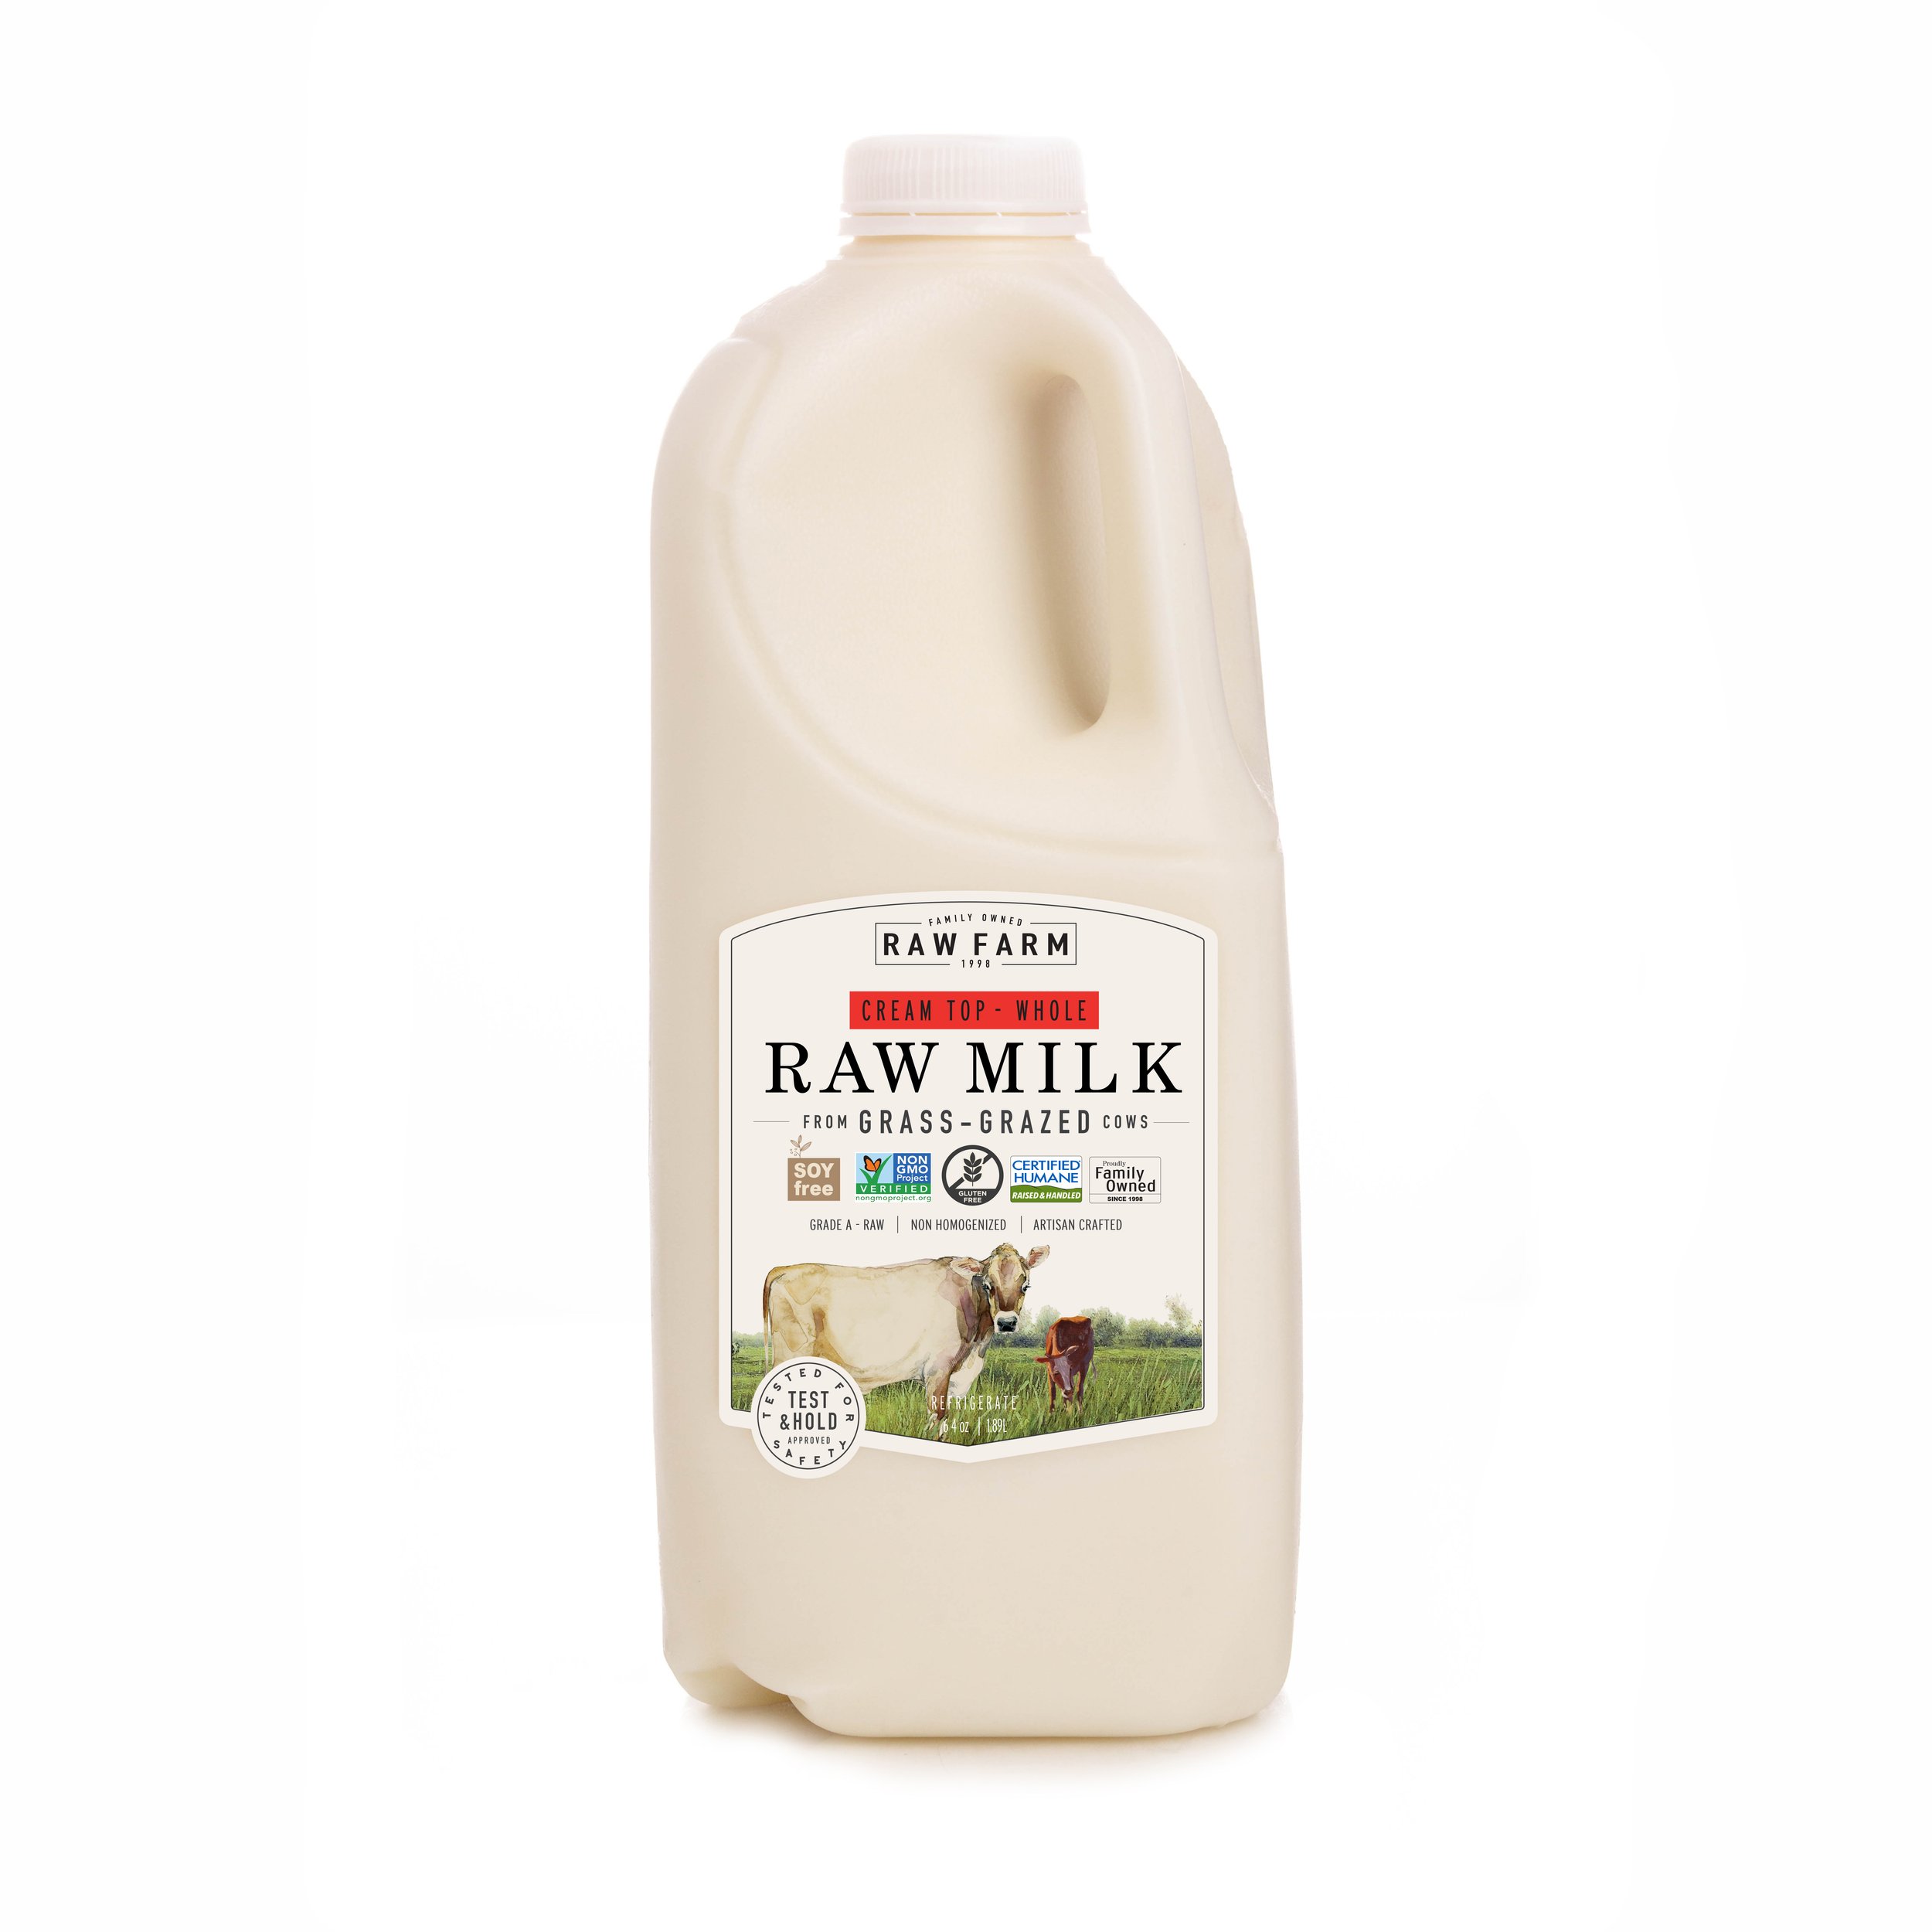 Is Raw Milk Safe to Drink?